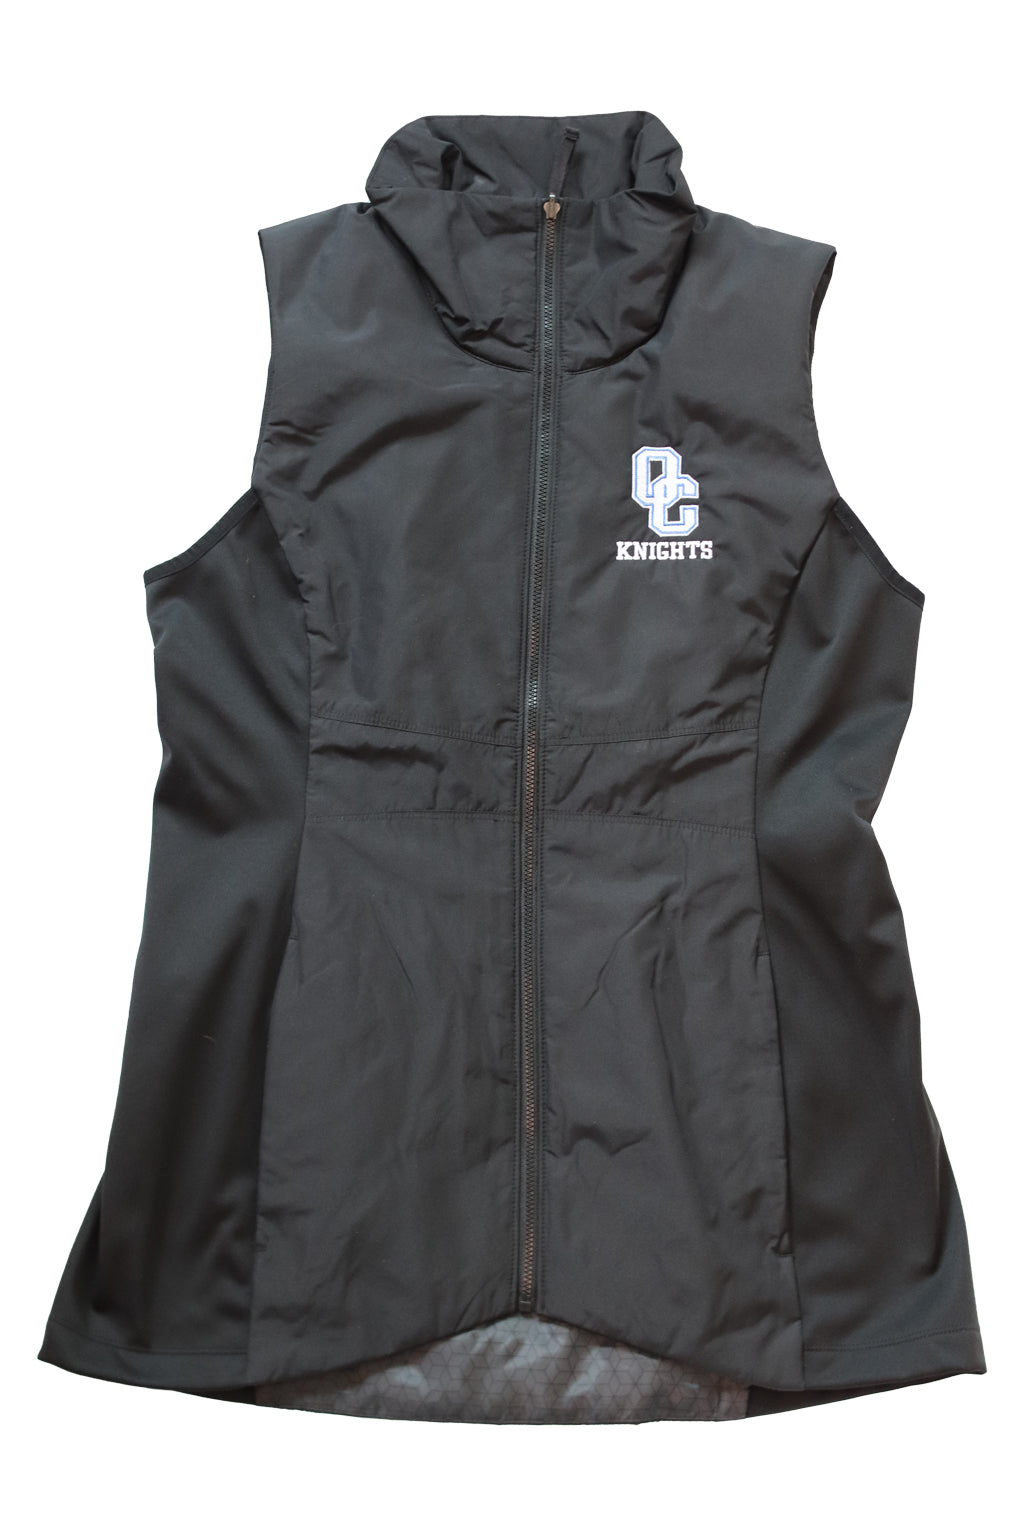 Black Vest with insulated lining. OC Knights logo in upper right.